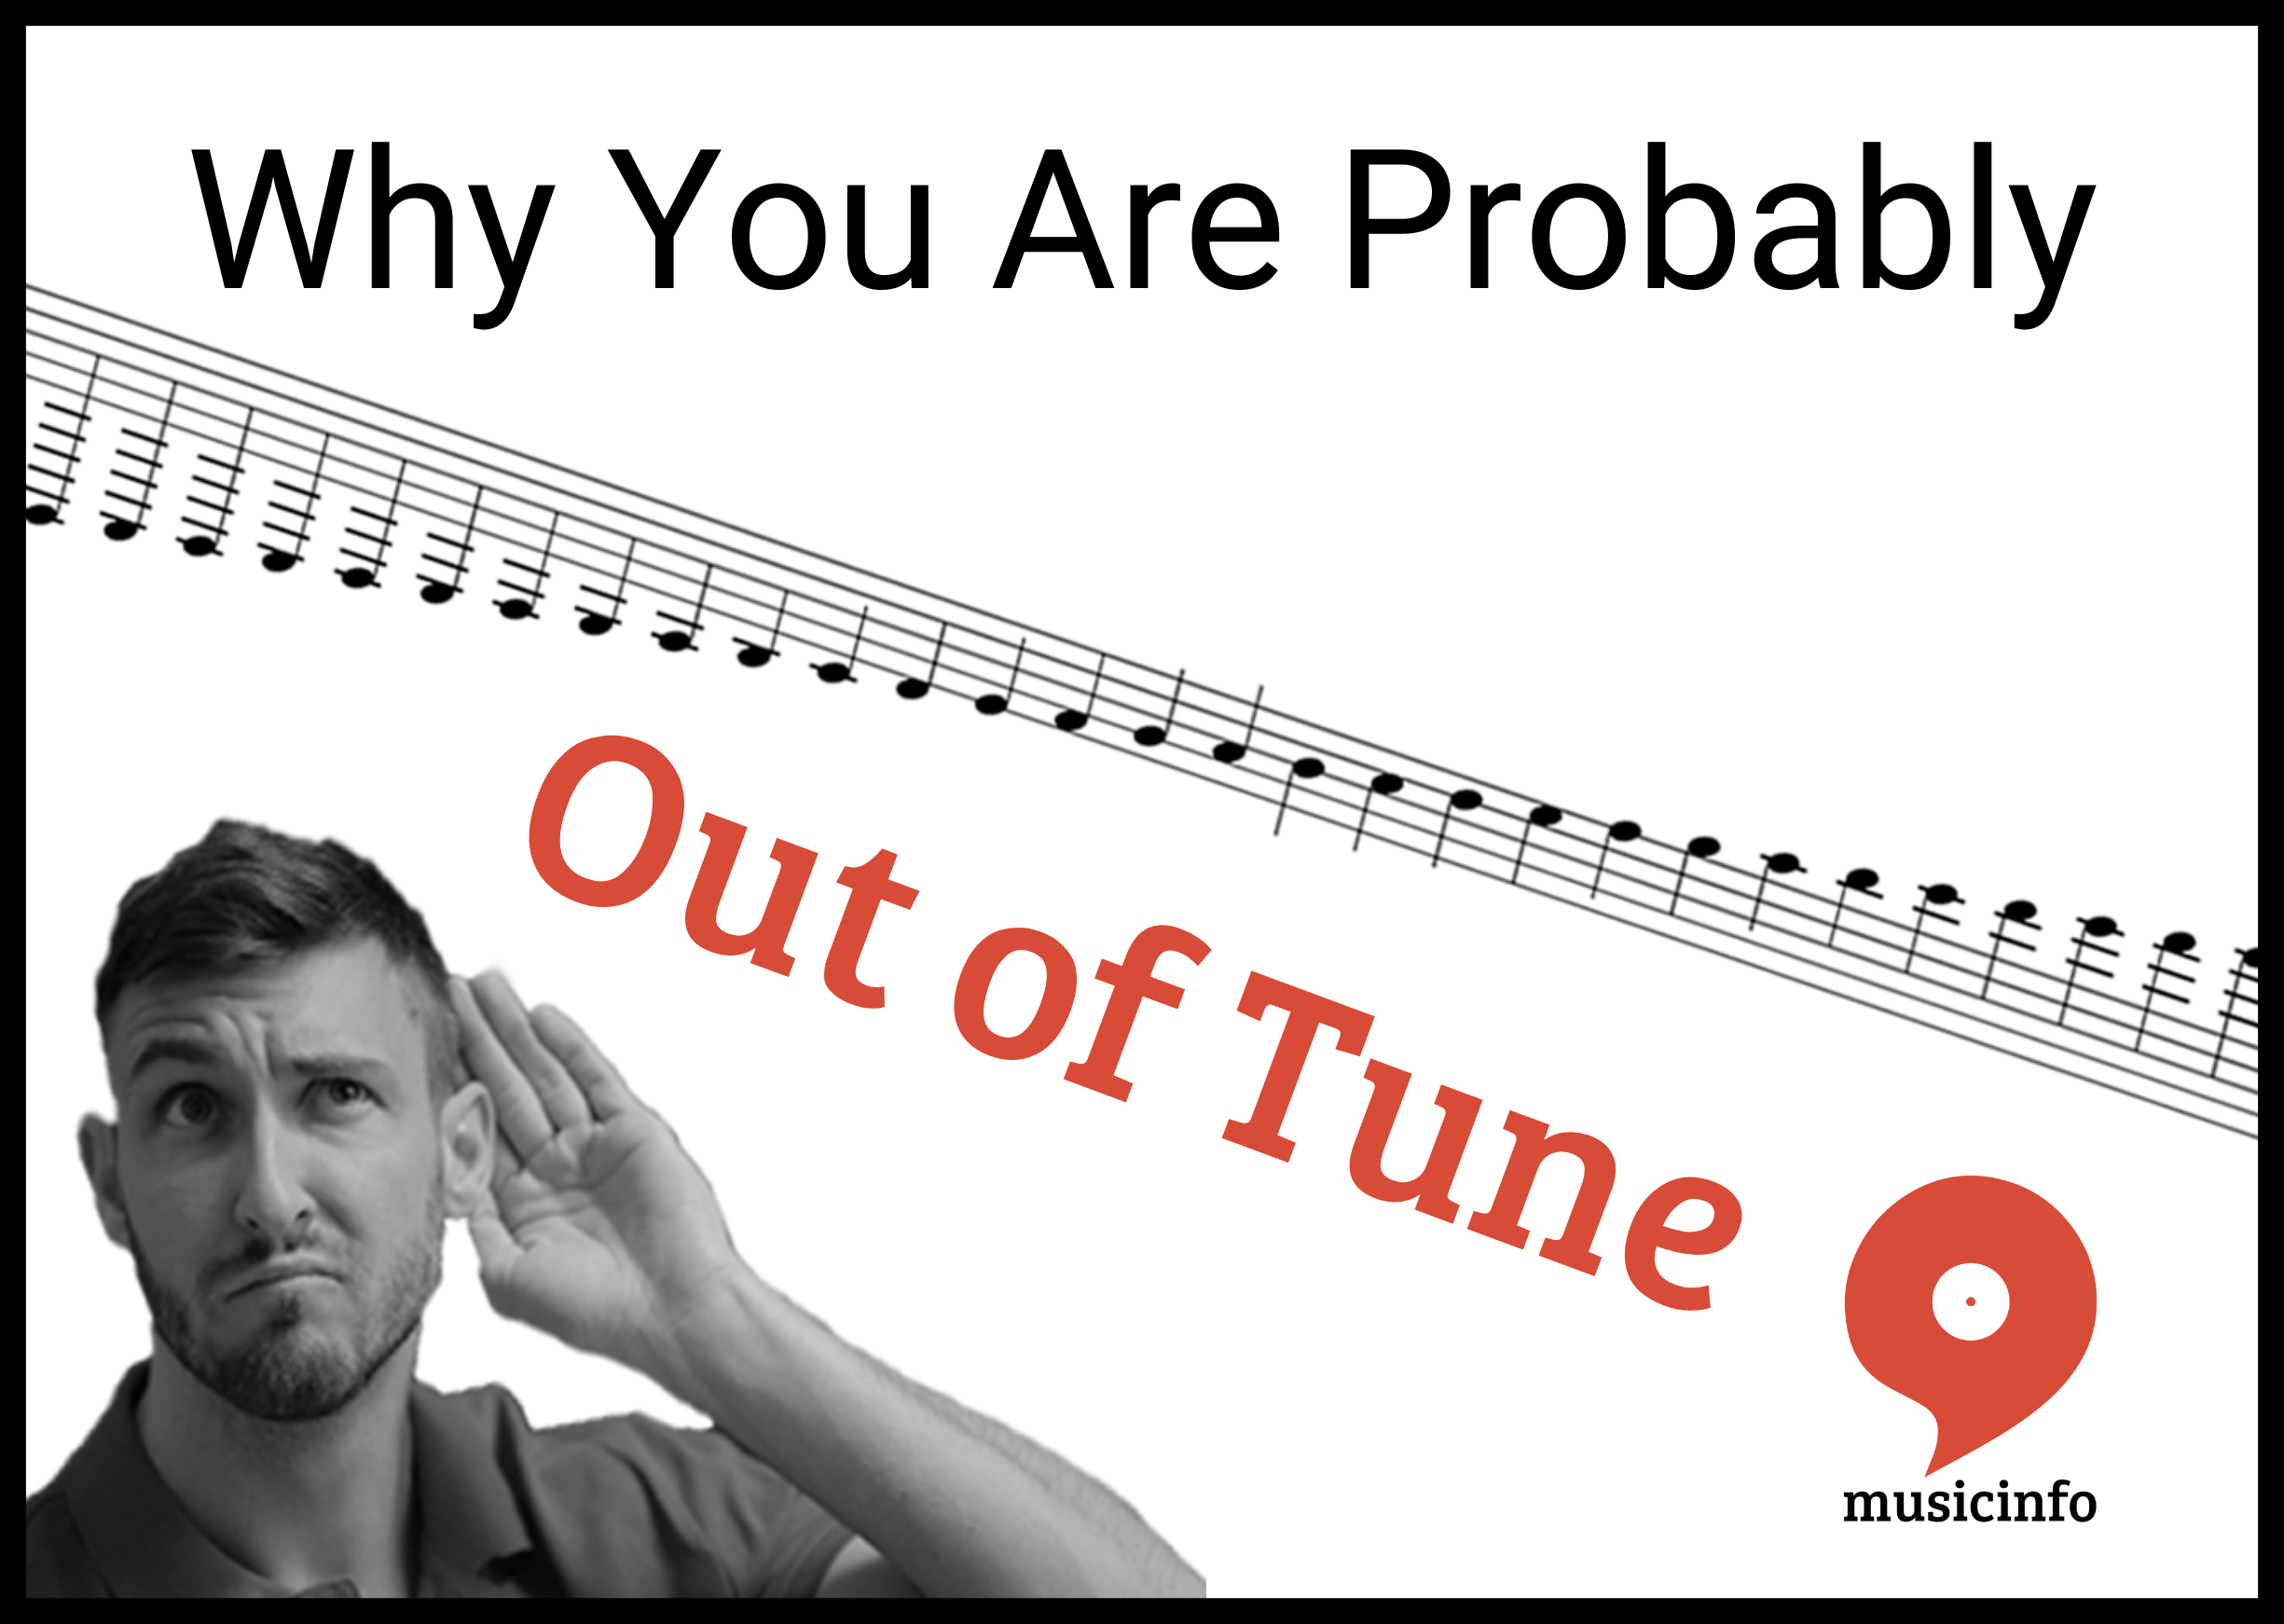 why you are probably out of tune